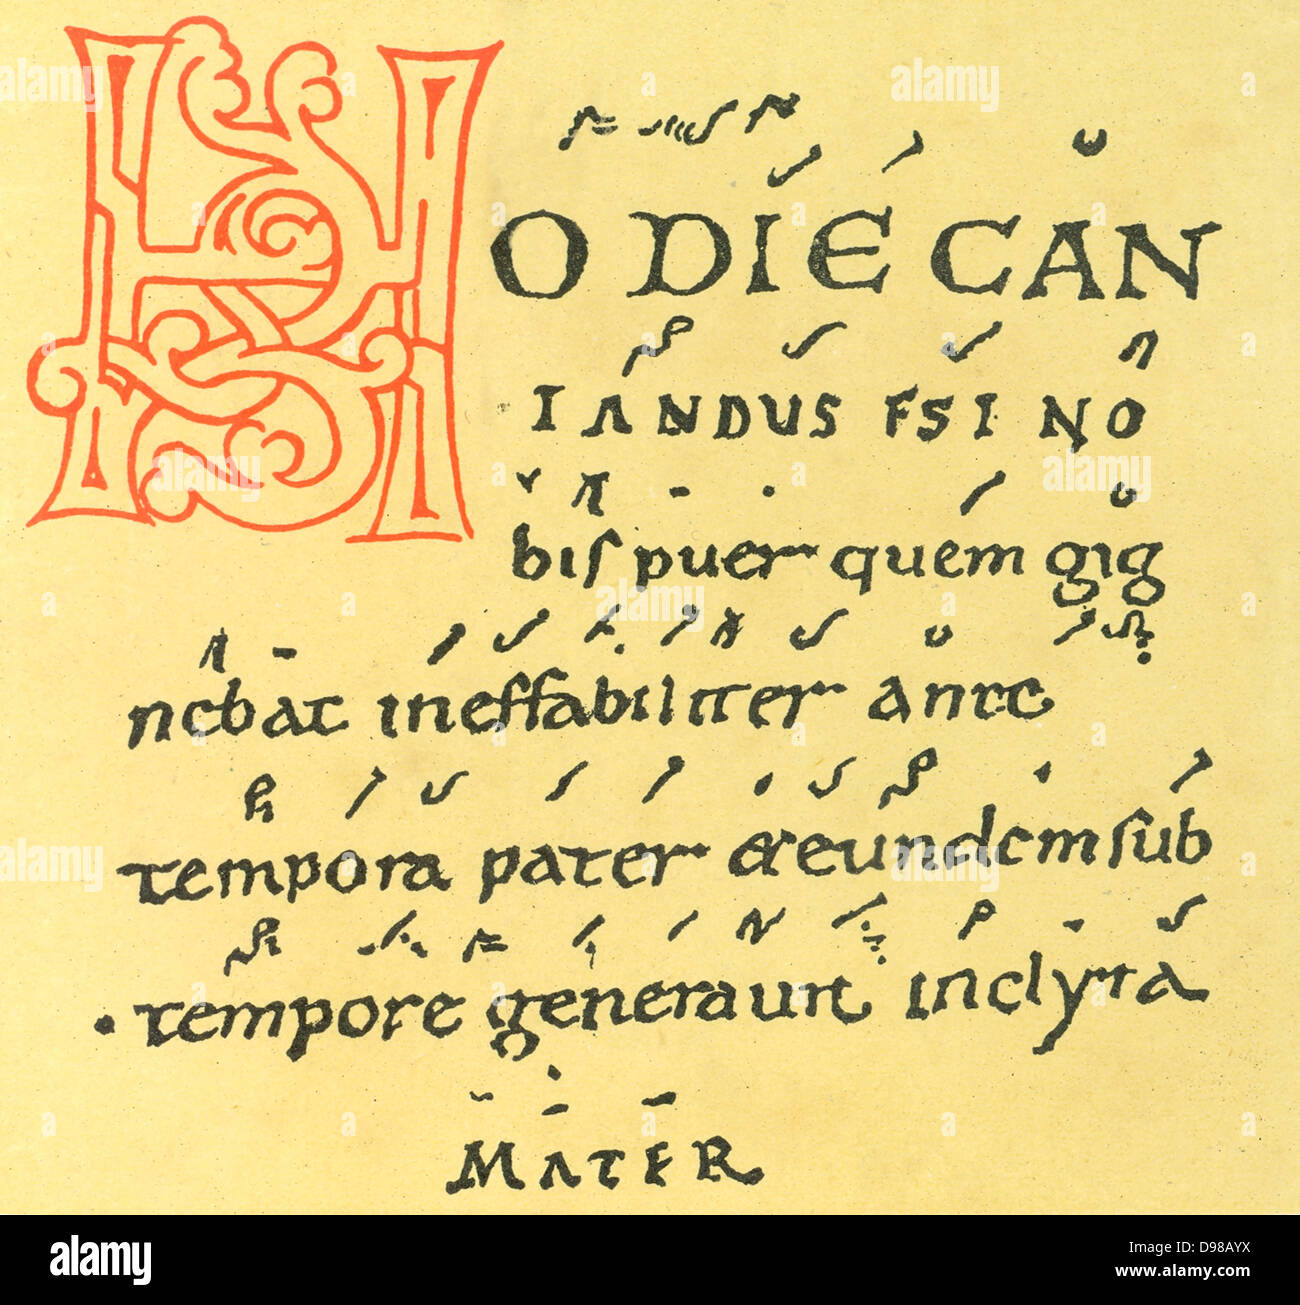 Musical notation. 10th century manuscript of Gregorian chant of Tutilo's Trope 'Hodie Cantandus', written in Neums notation which was superseded by Staff notation. Tutilo or Tuathal (d915) Irish Benedictine monk, musician and poet at the Abbey of St Gall, Switzerland. Stock Photo